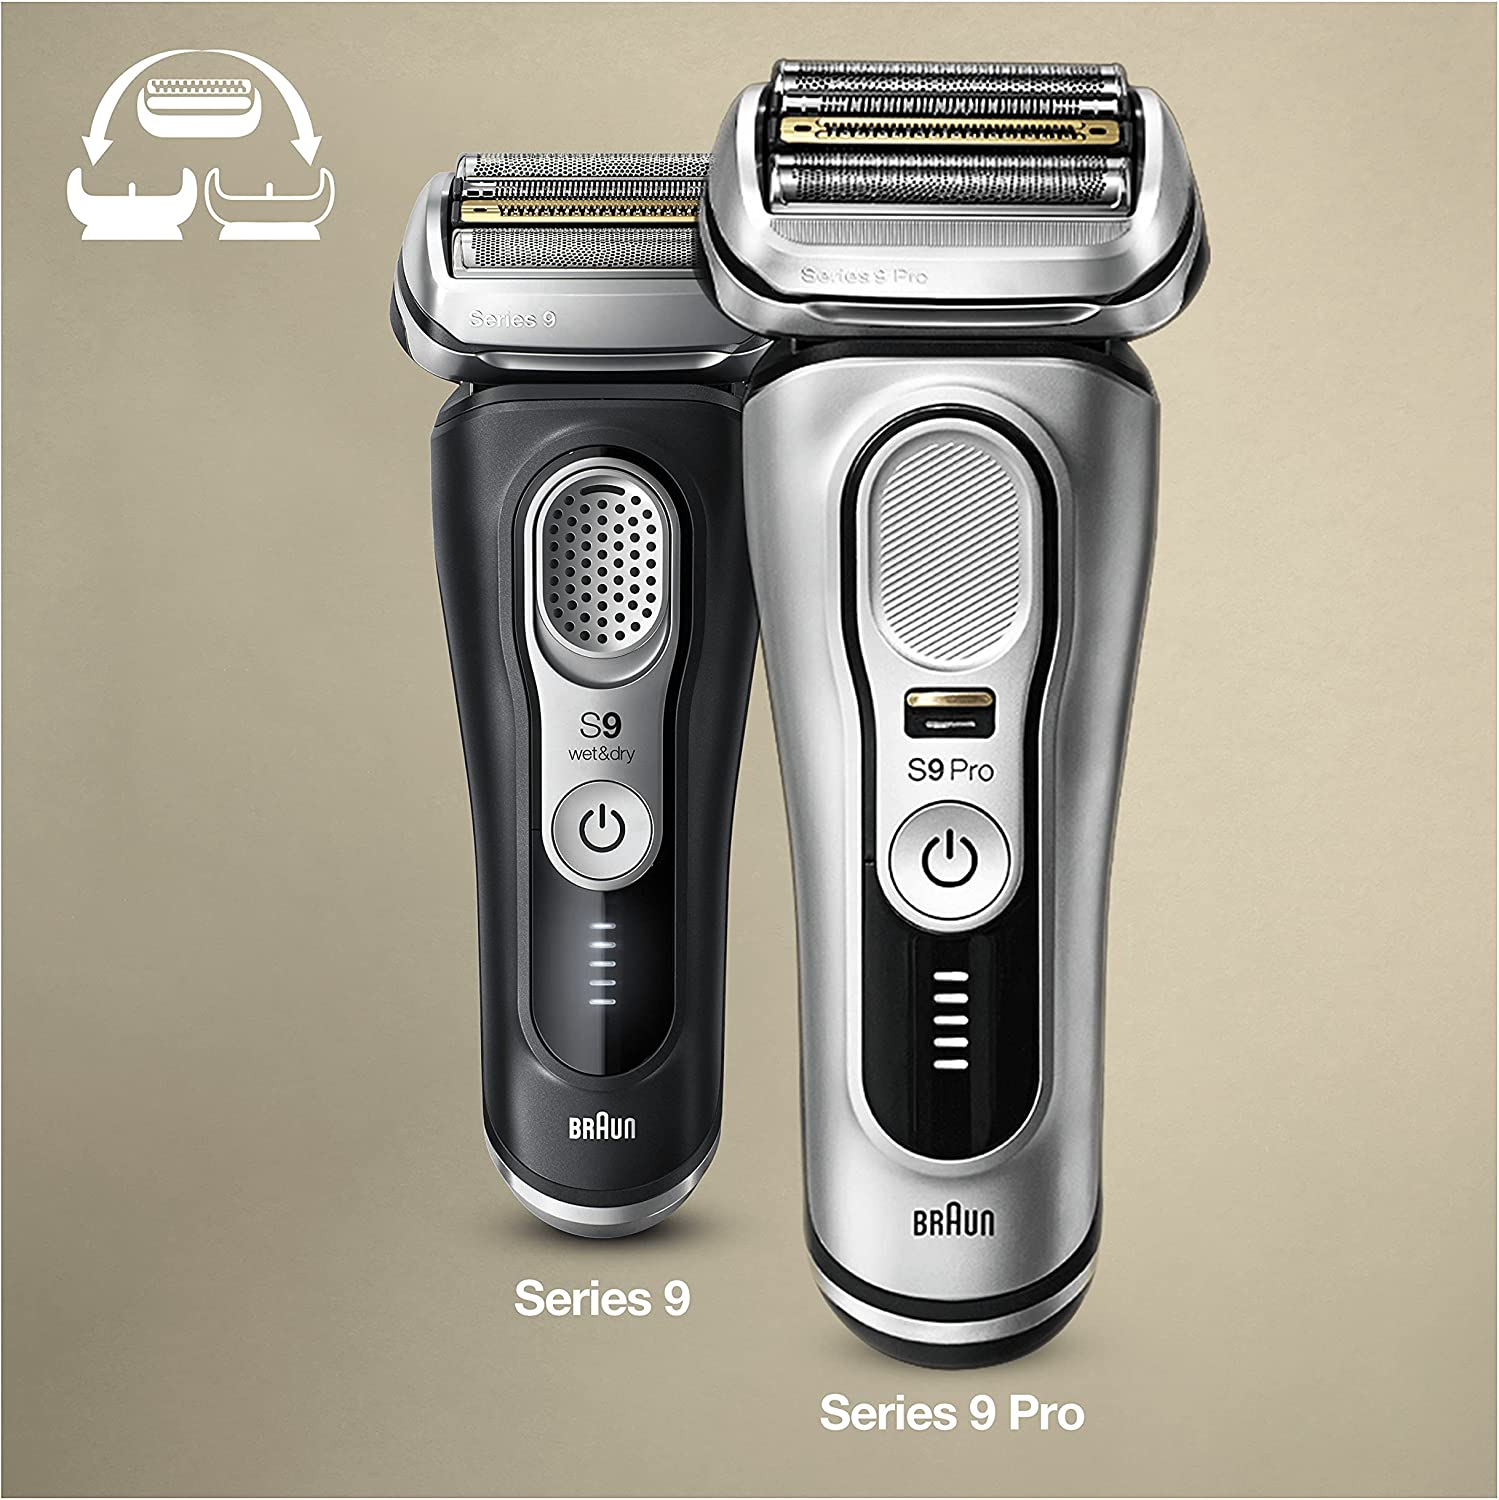 Braun 94M Replacement Shaver Head Cassette Silver Compatible with Series 9 Pro and Series 9 Razors - Healthxpress.ie